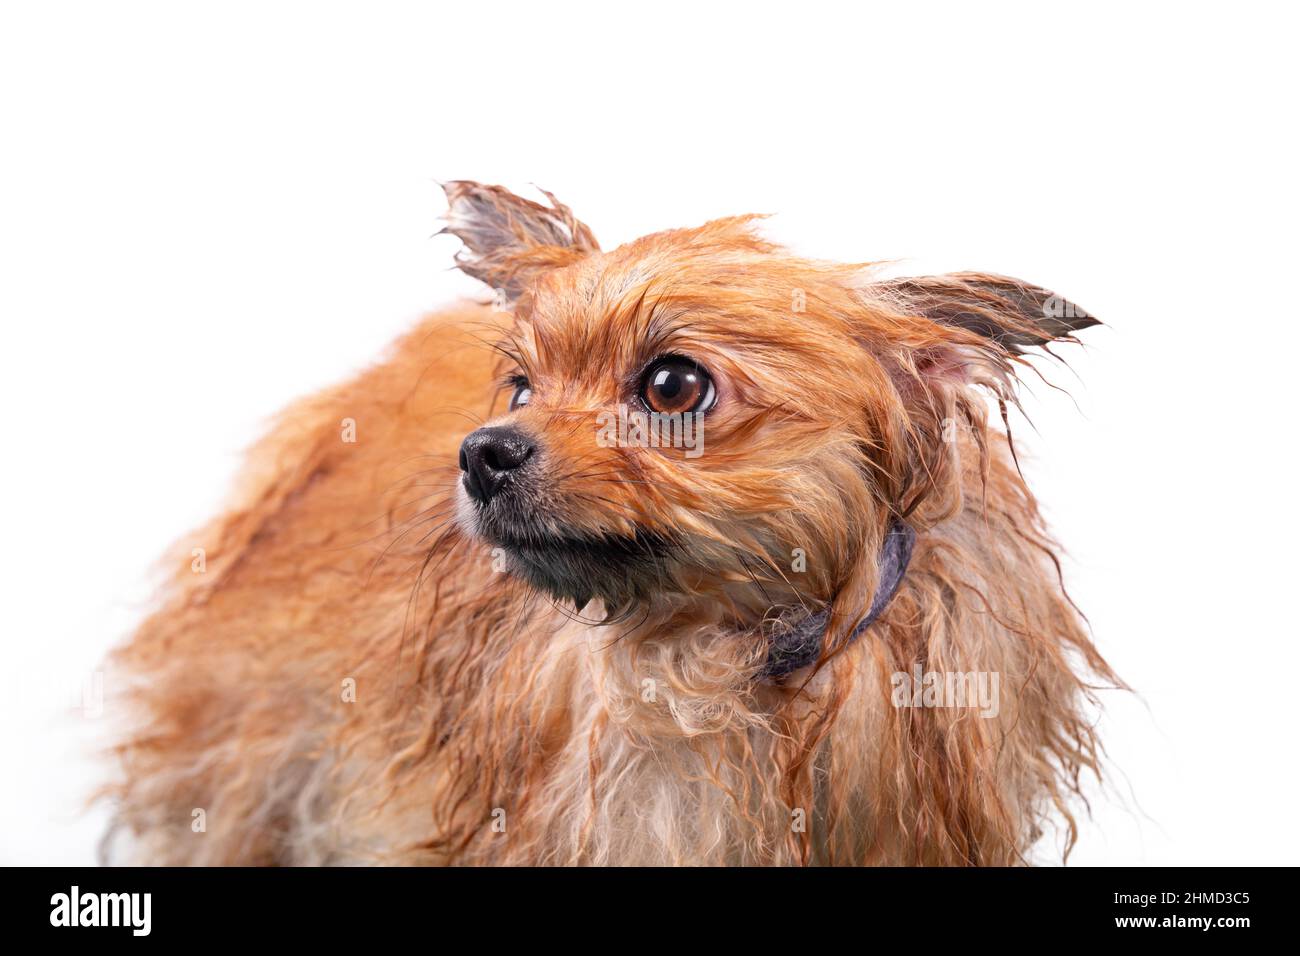 Wet funny Orange Pomeranian Spitz. The dog is washed before the haircut and grooming. Isolated on white background. Stock Photo